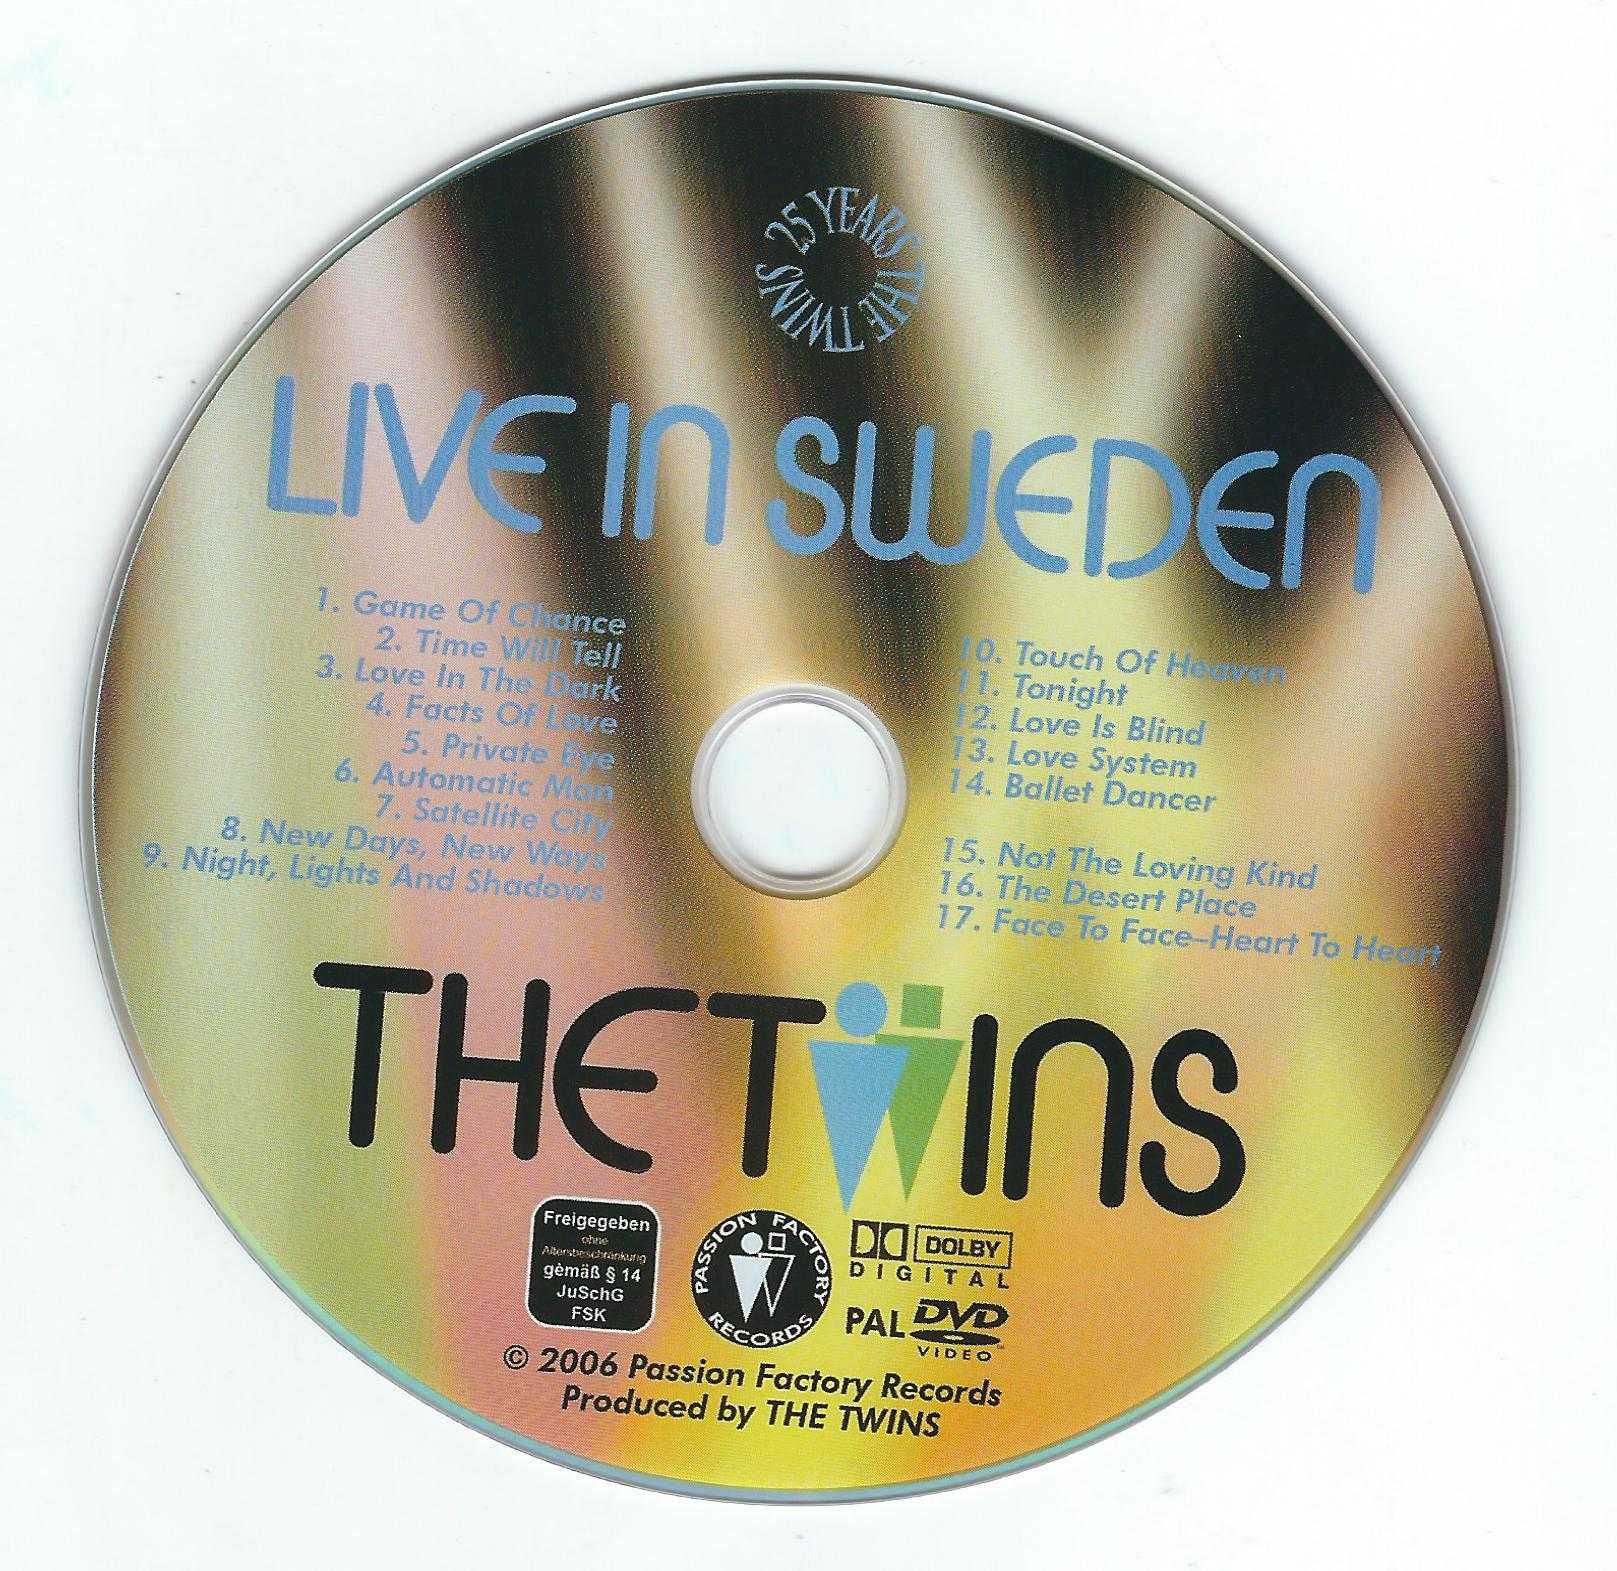 DVD The Twins - Live In Sweden (2006) (Passion Factory Records)